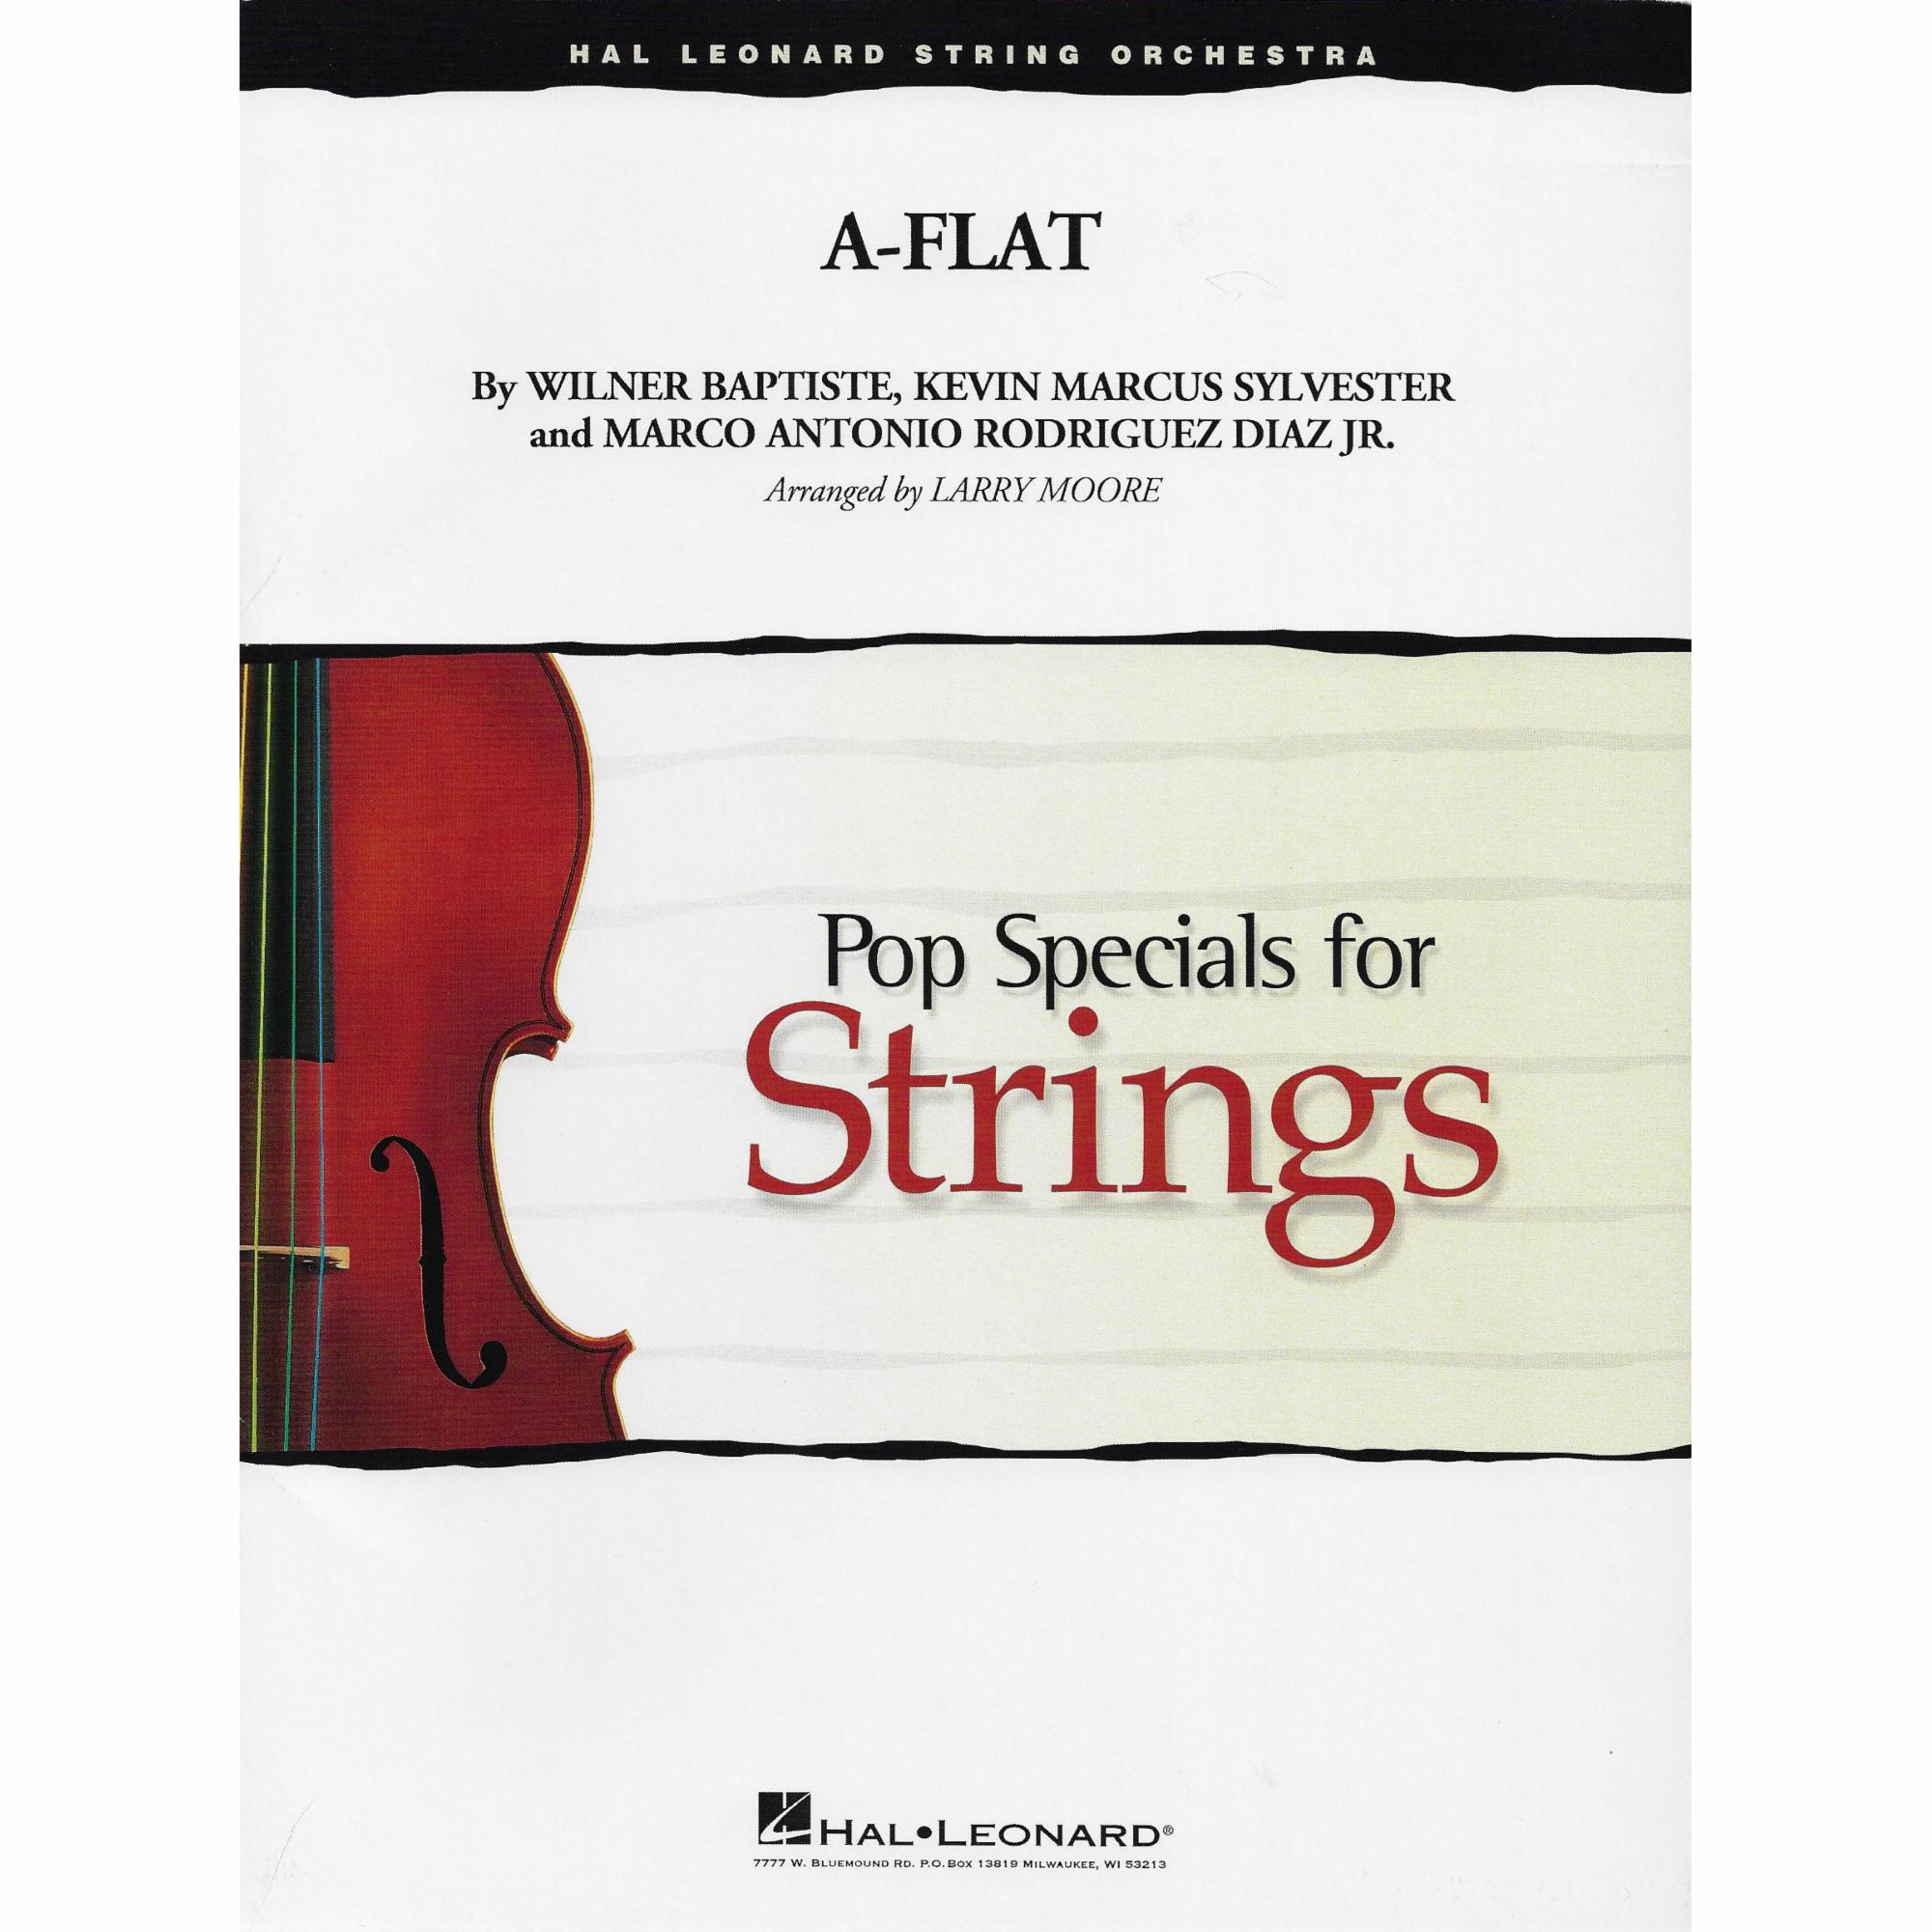 A-Flat for String Orchestra